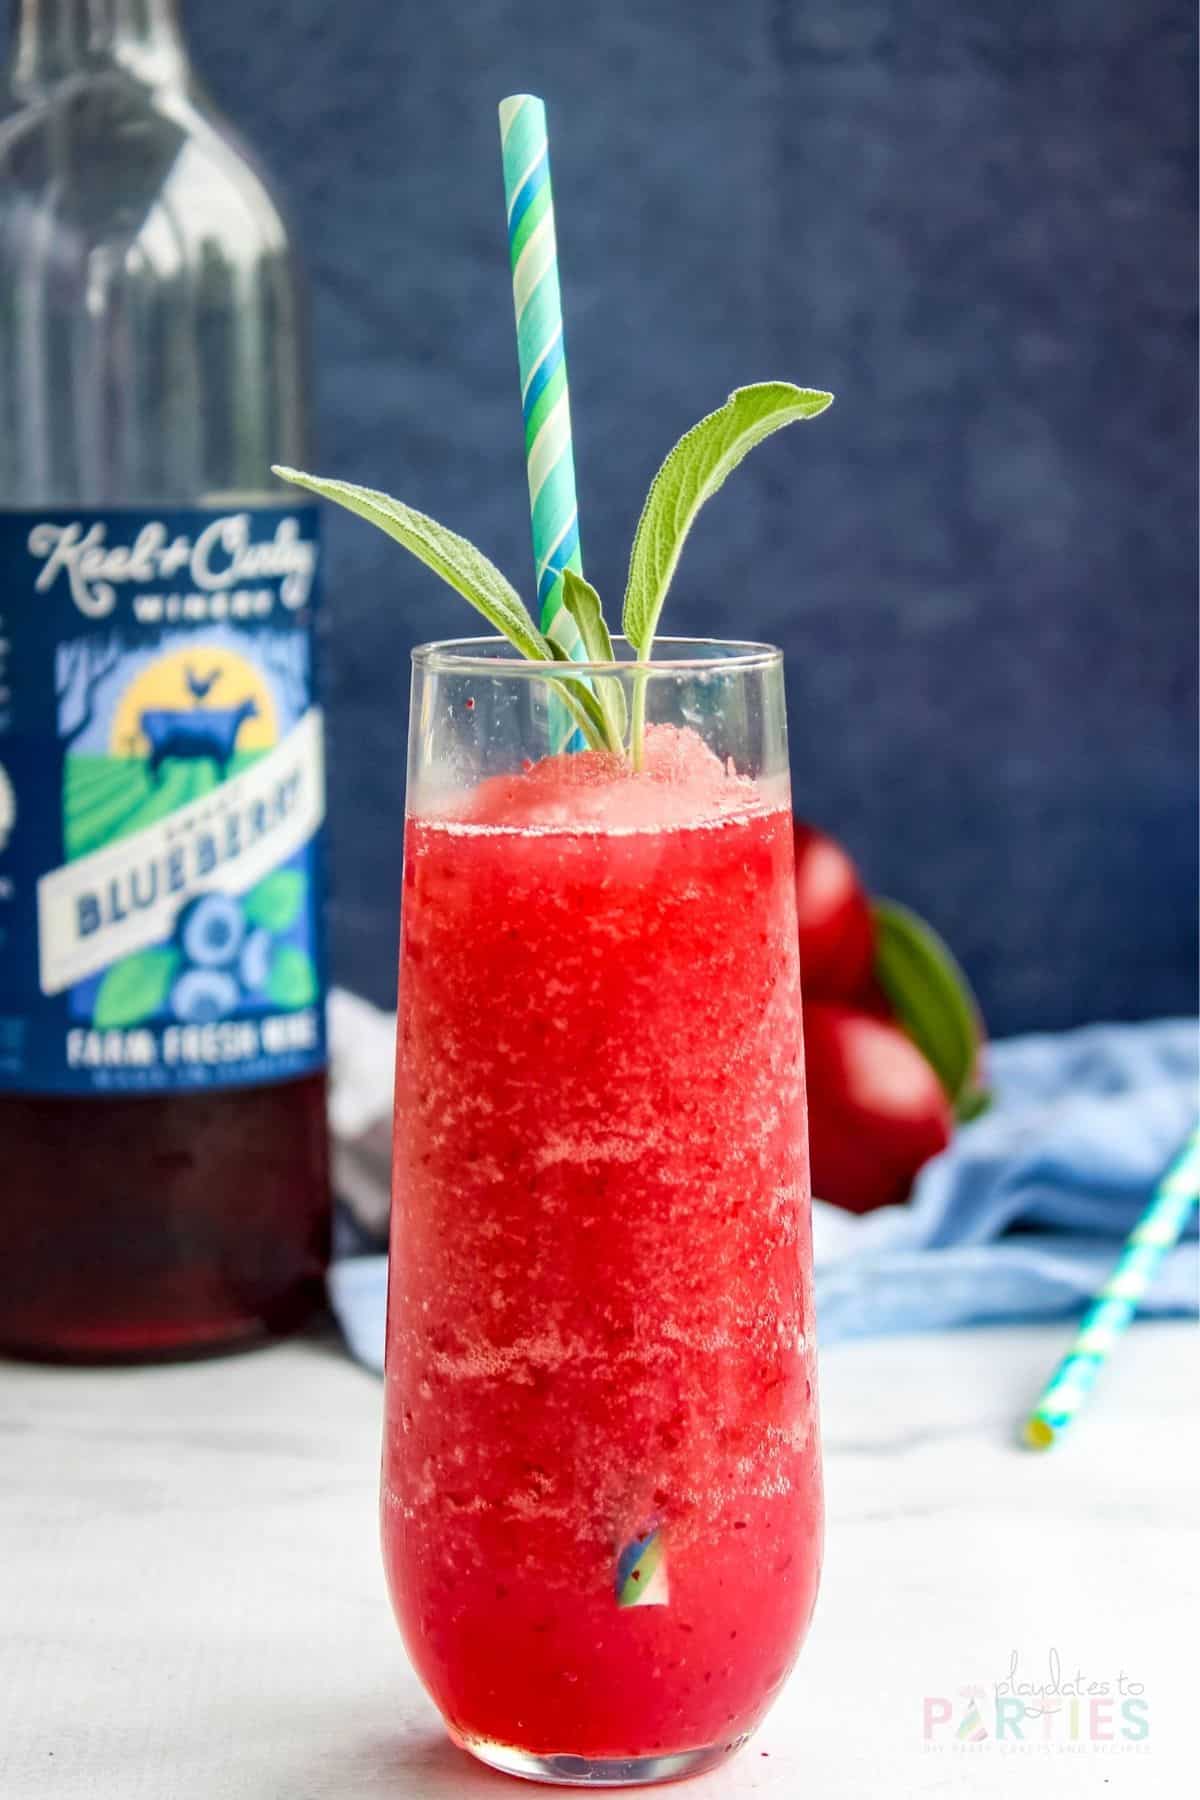 front view of a red wine slushie with a bottle of blueberry wine and fresh plums behind it